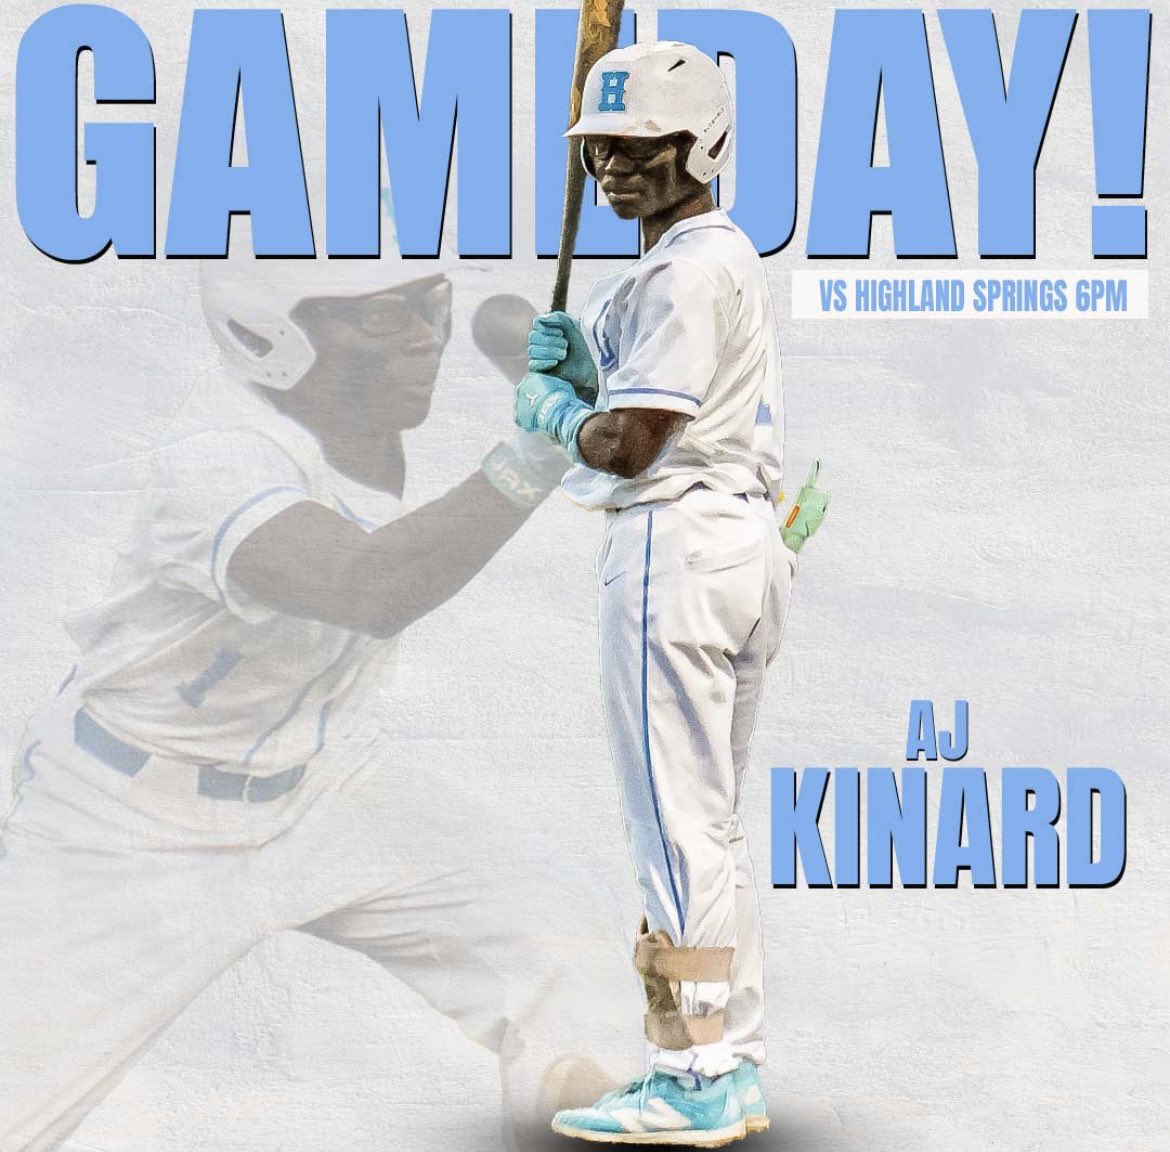 Game day! Come out to Hanover High School tonight to watch the Hawks take on the Springers of Highland Springs! First pitch is set for 6:00pm. #SquadUp